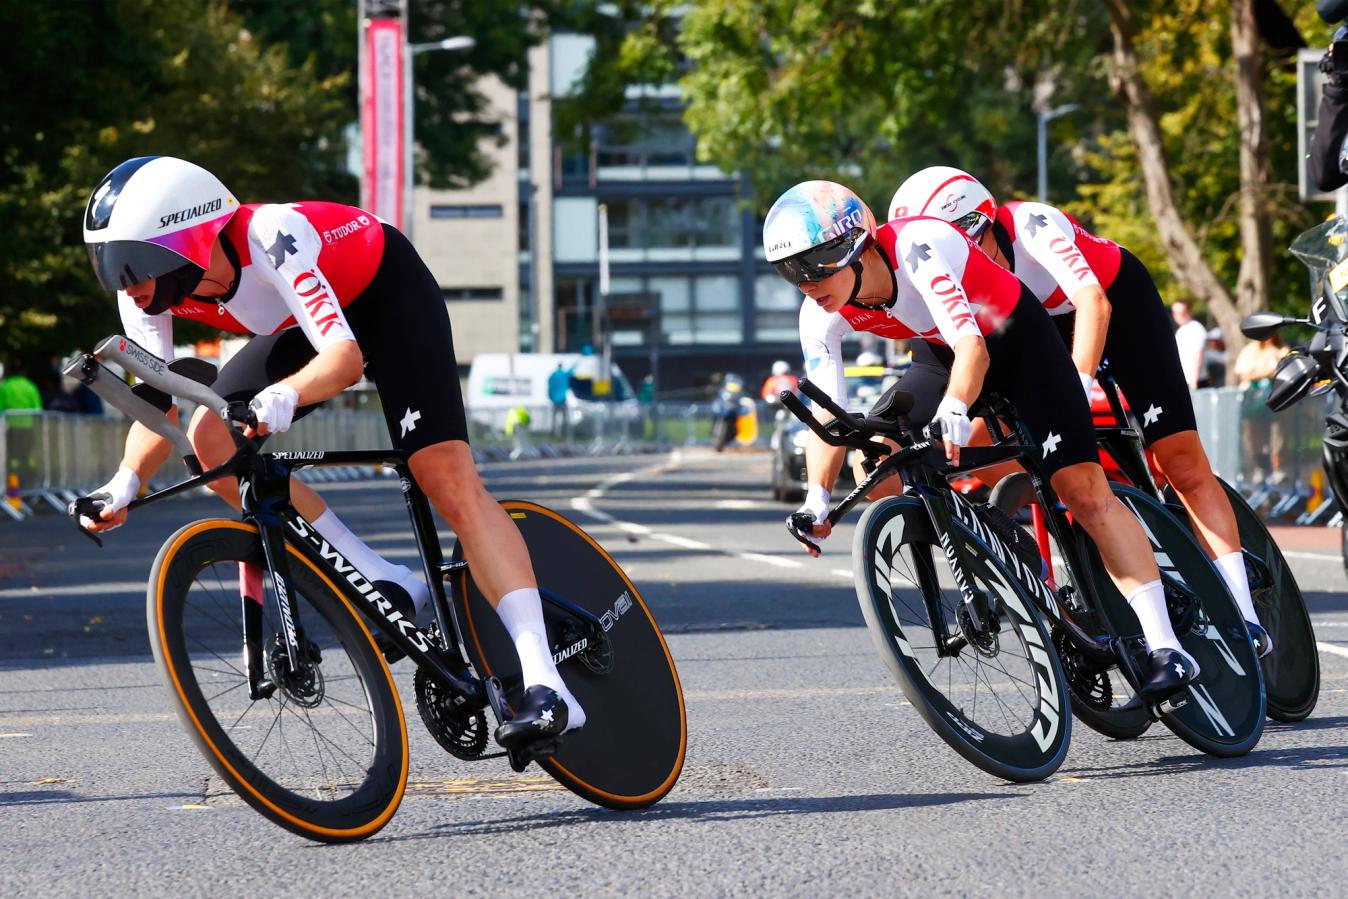 Swiss riders at the Glasgow World Championships wore skinsuits that look like the Fenoq